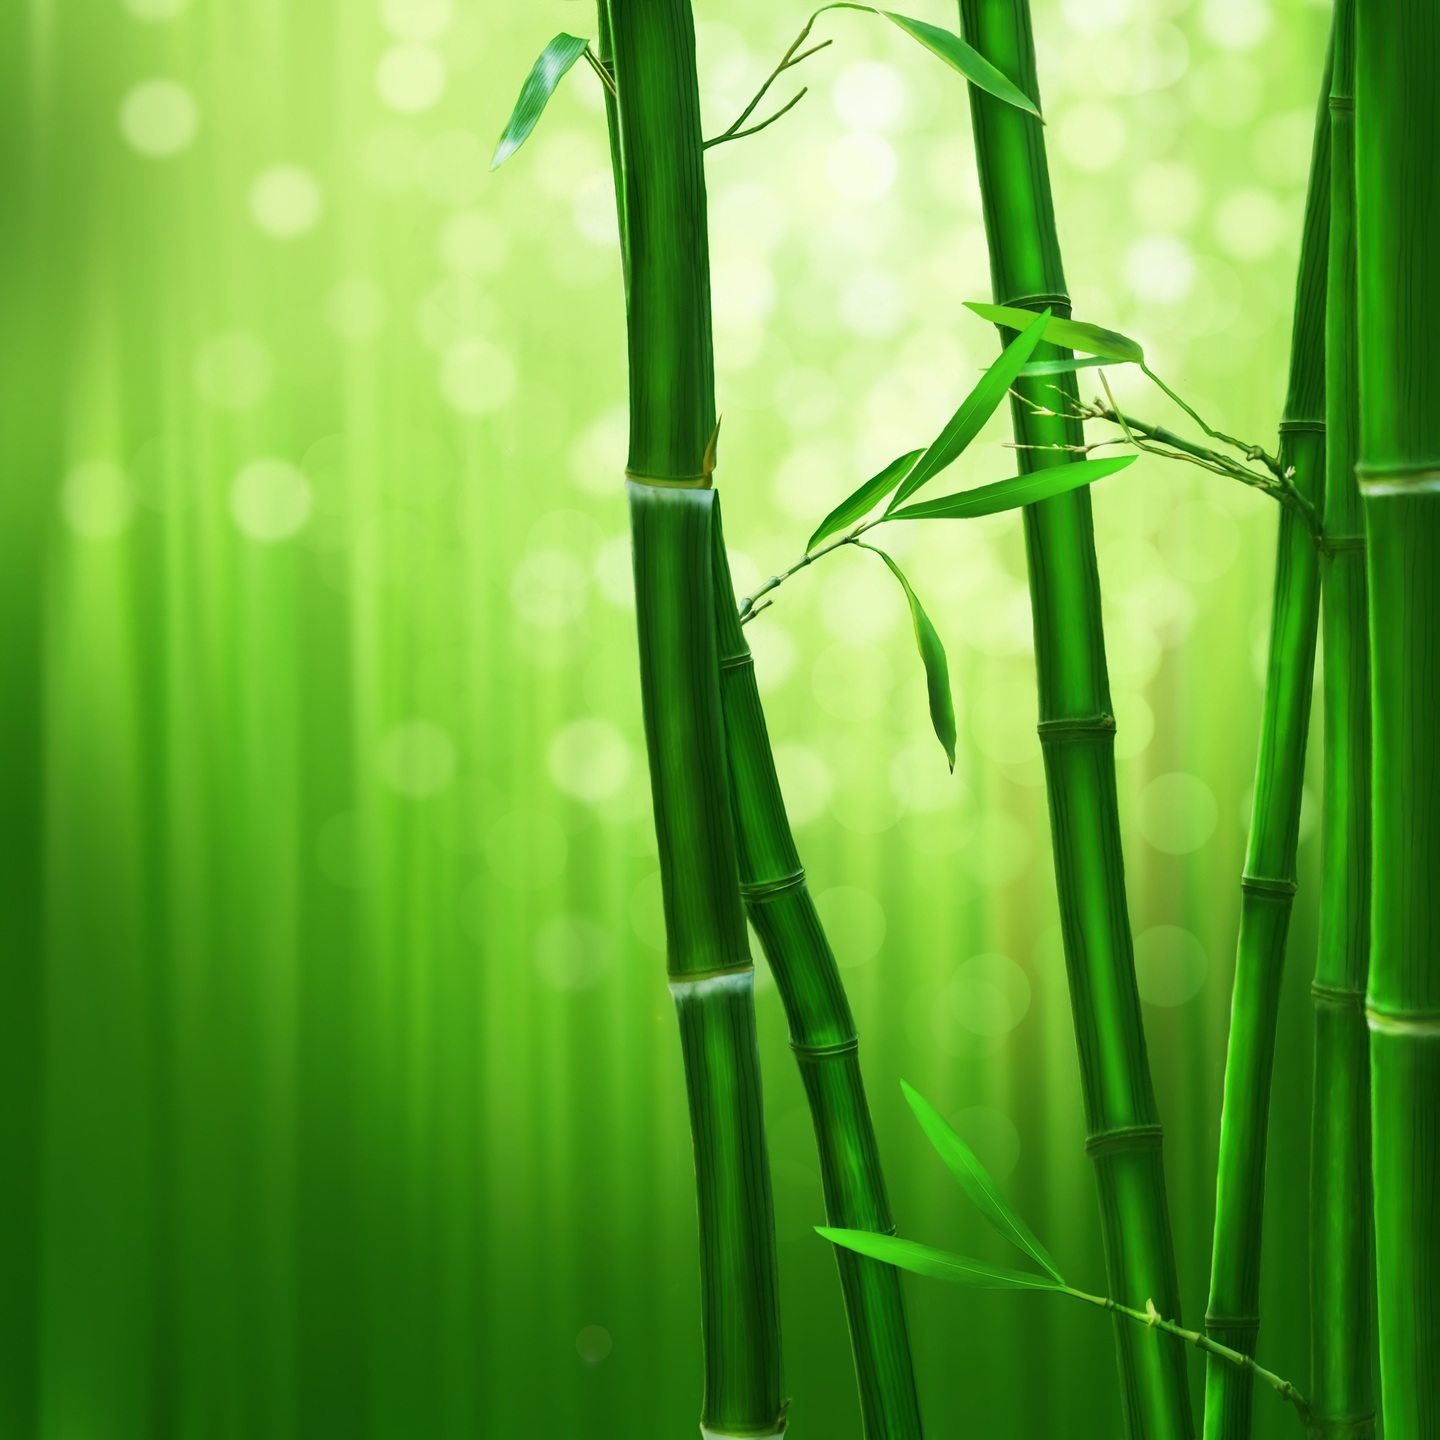 Beautiful 3d Wallpaper Of Bamboo With Green Background - Beautiful Bamboo Trees - HD Wallpaper 